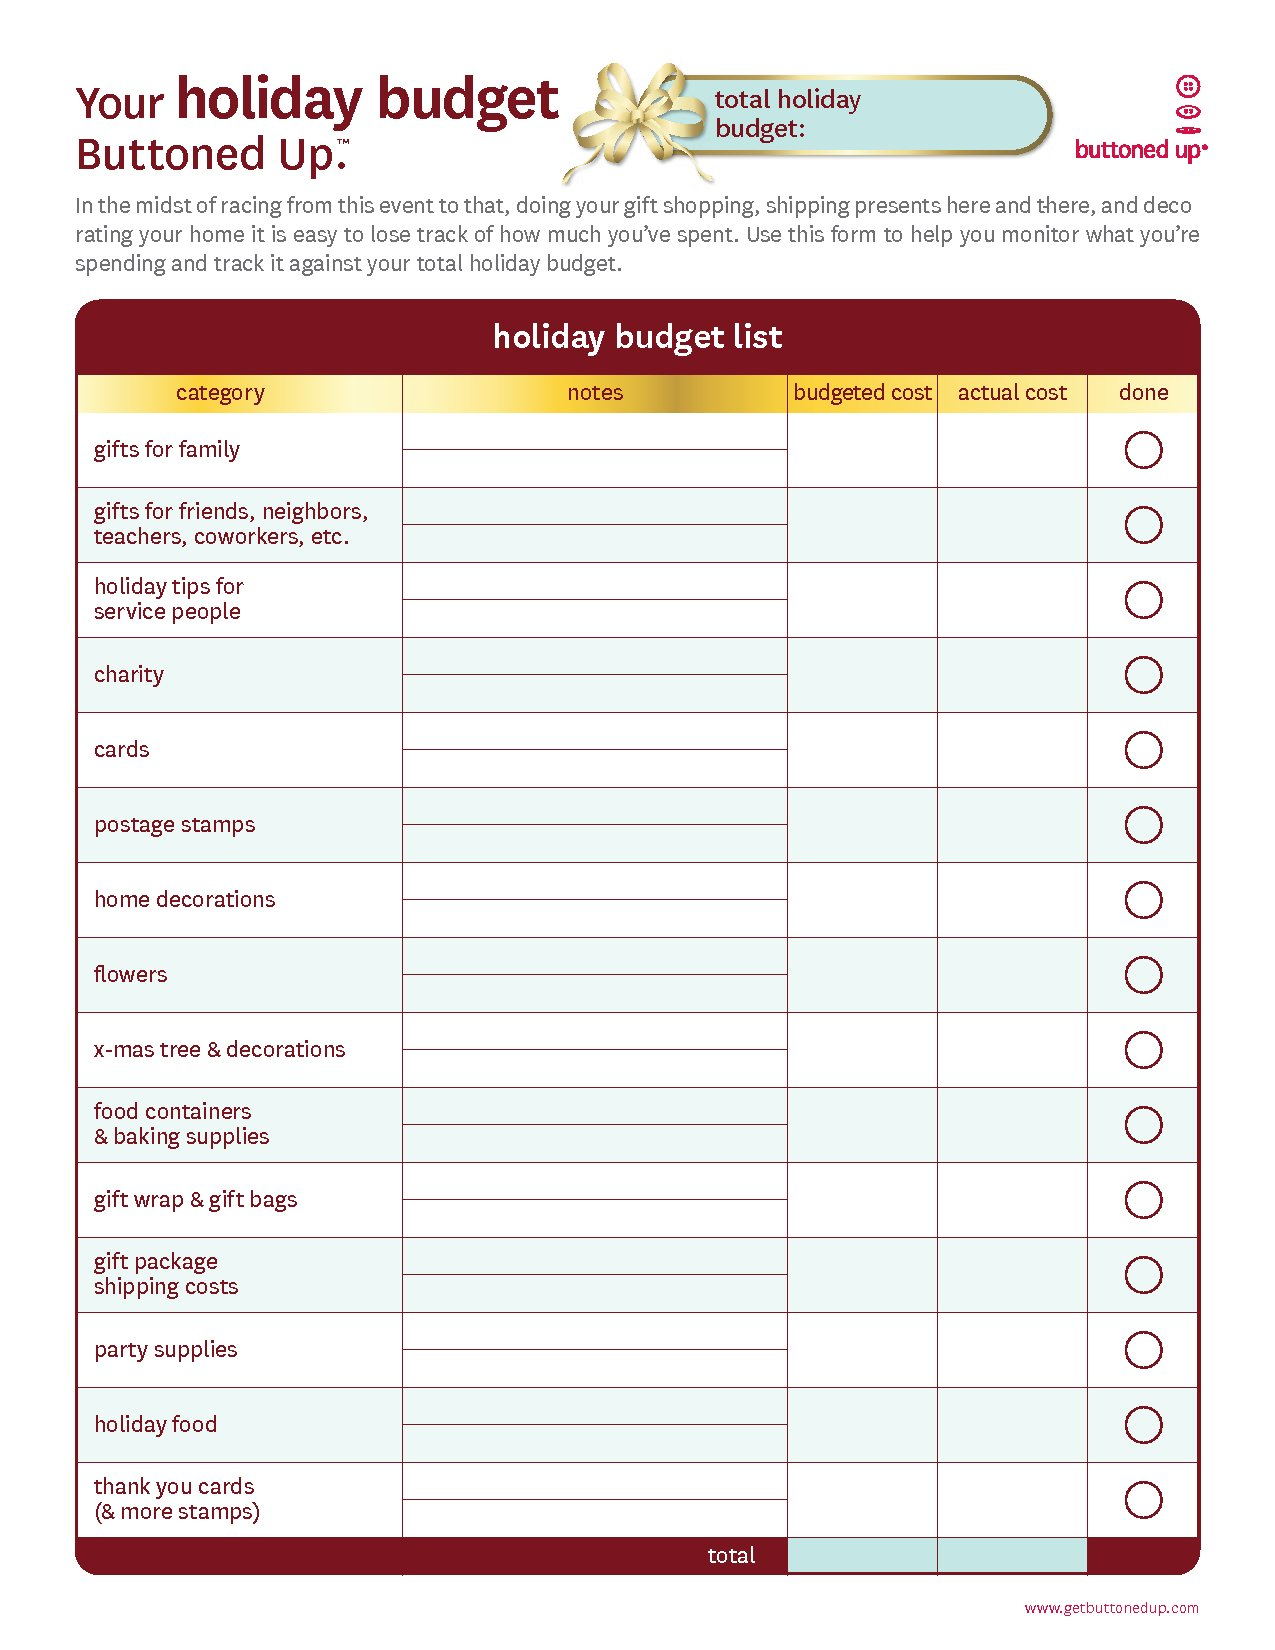 Free Download Hold Budget Spreadsheet Home Stunning Family Planner For Free Download Budget Worksheet